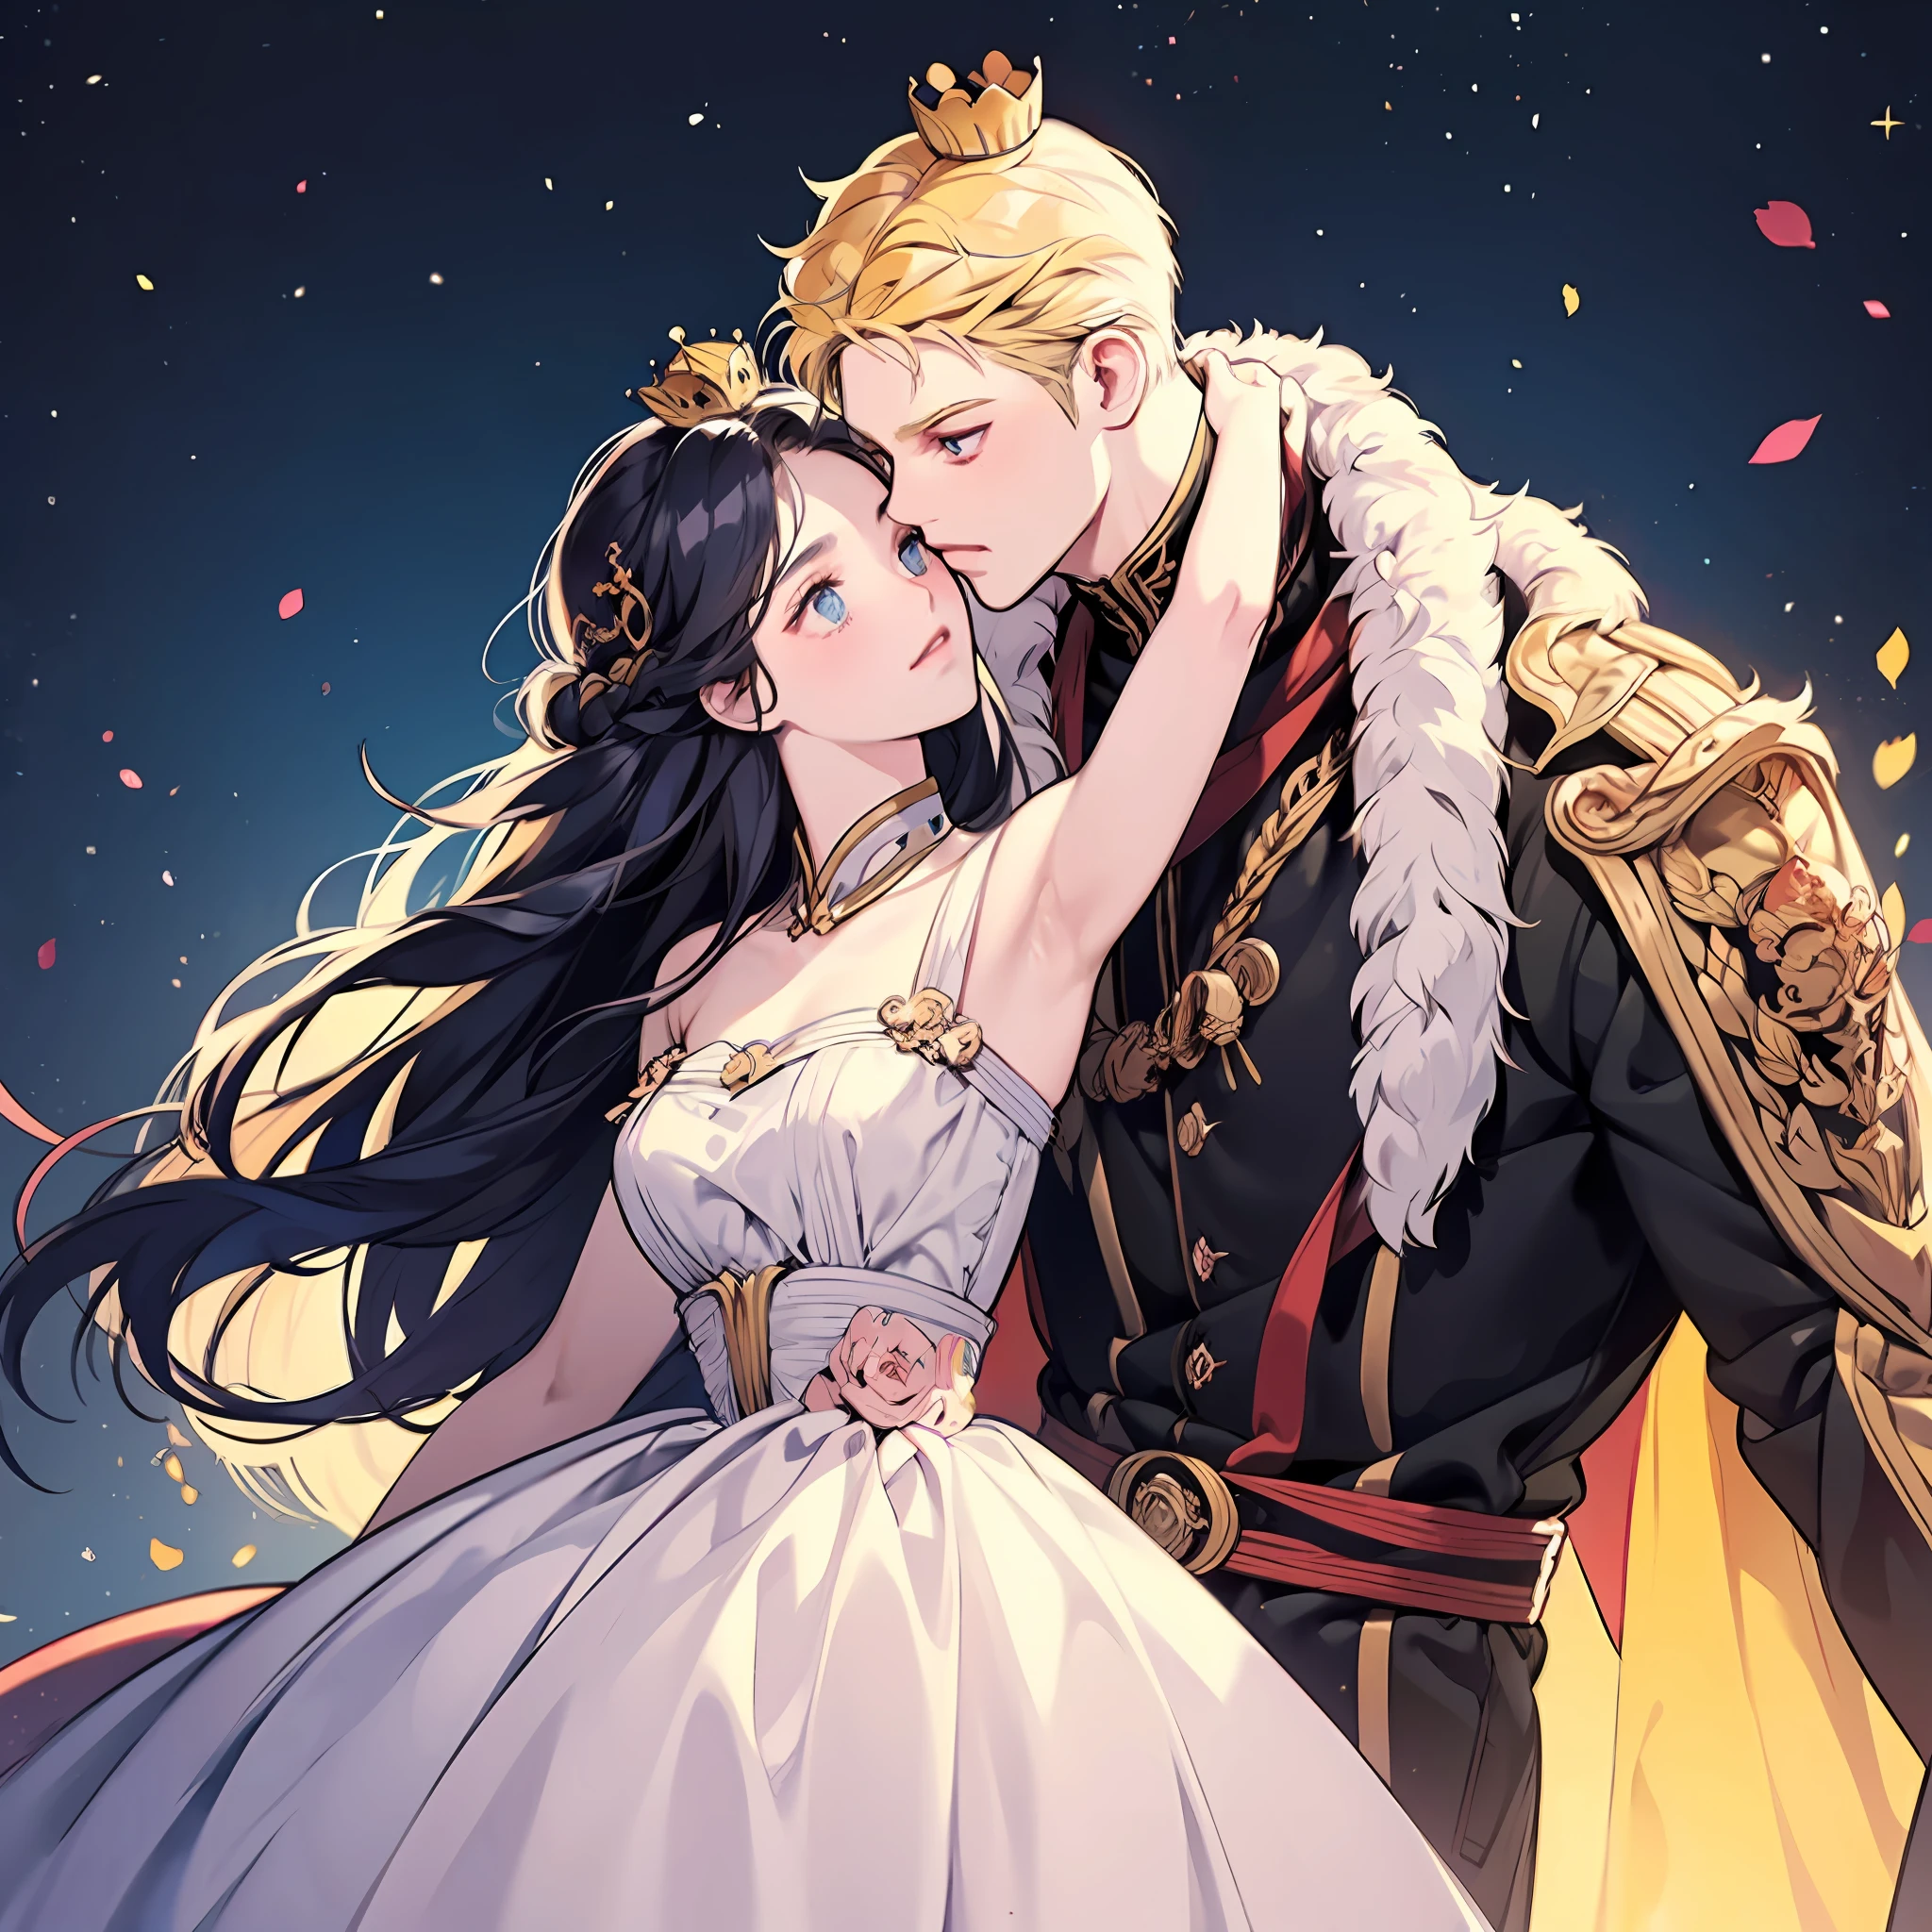 blonde man, dark blue hair girl, naruhina, hug, masterpiece, couple, standing, royalti, nobility, (((crowns))), king, queen, looking into each other eyes, romantic, kiss